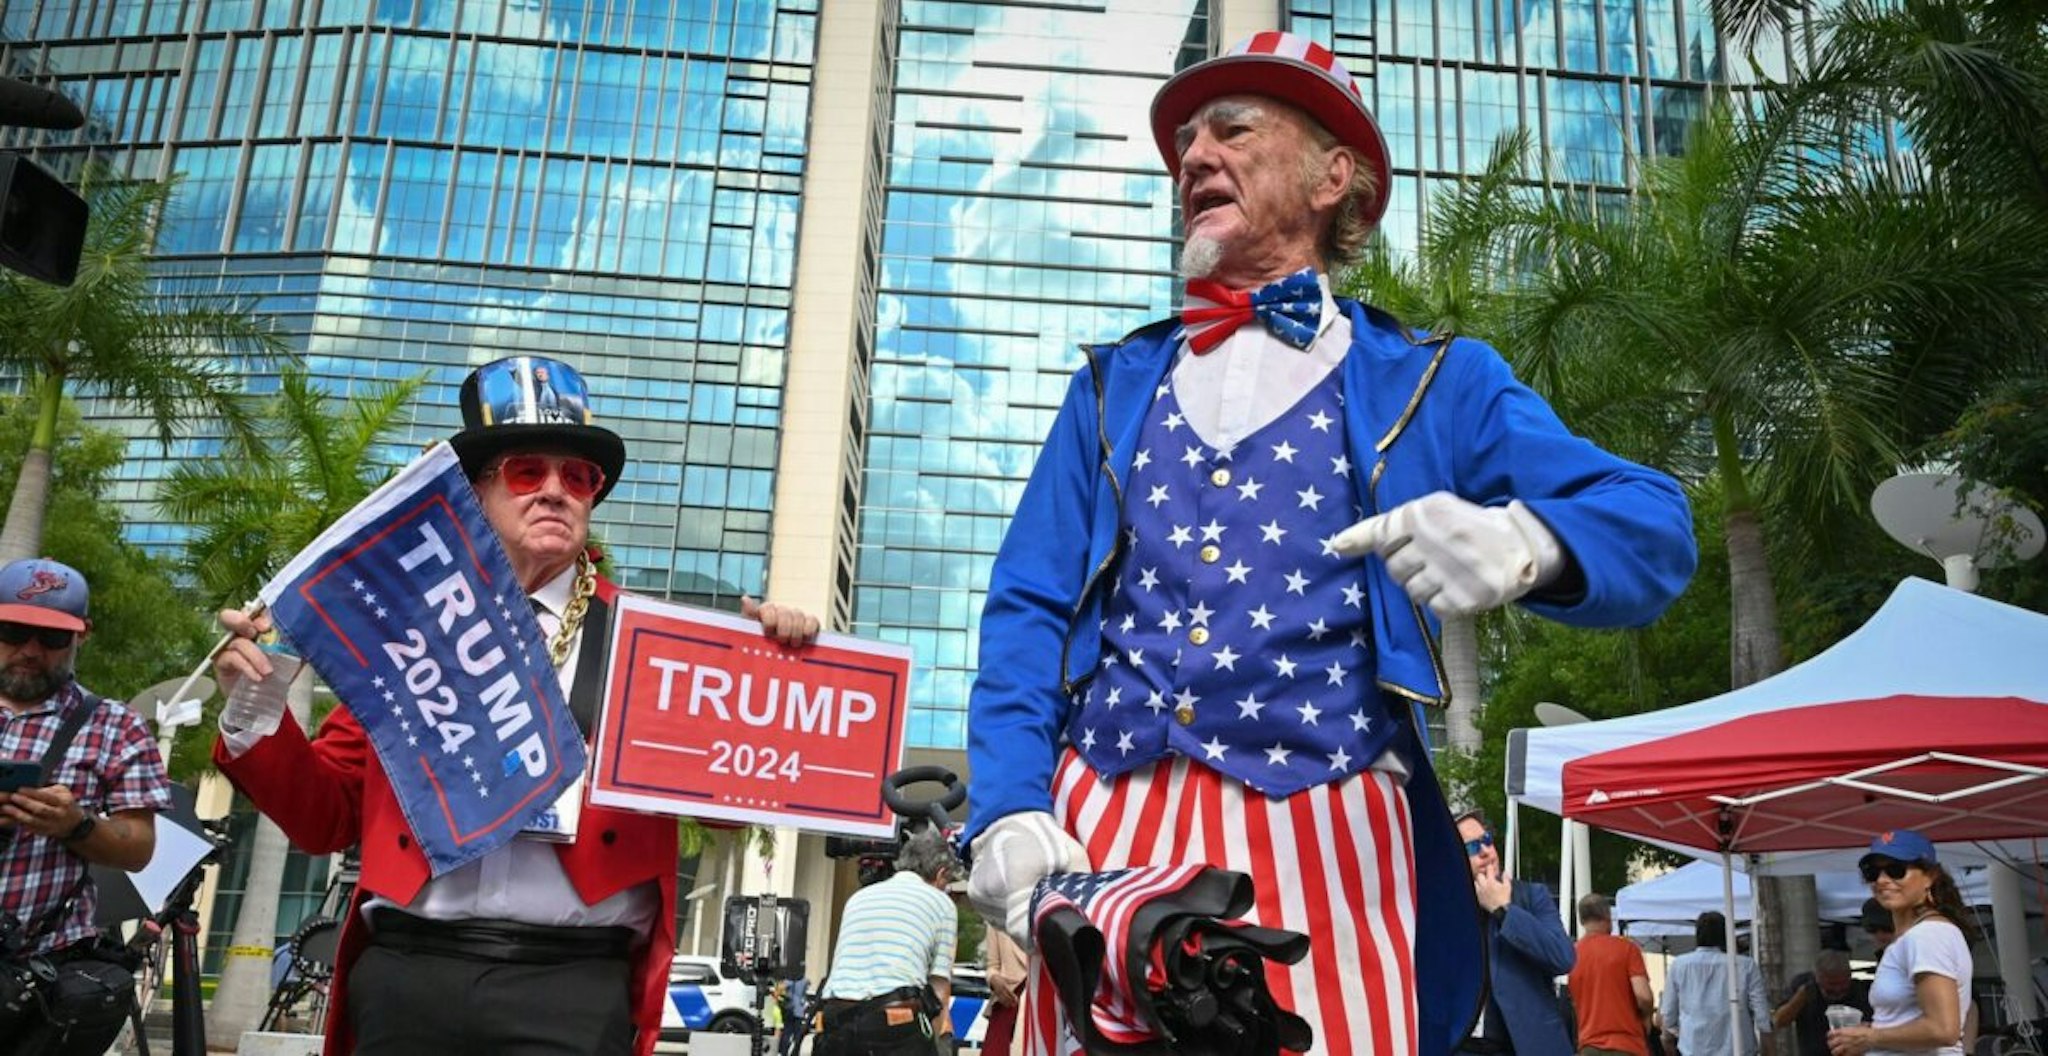 Trump supporters show their support in front of the Wilkie D. Ferguson Jr. United States Courthouse before the arraignment of former President Donald Trump in Miami, Florida on June 13, 2023.